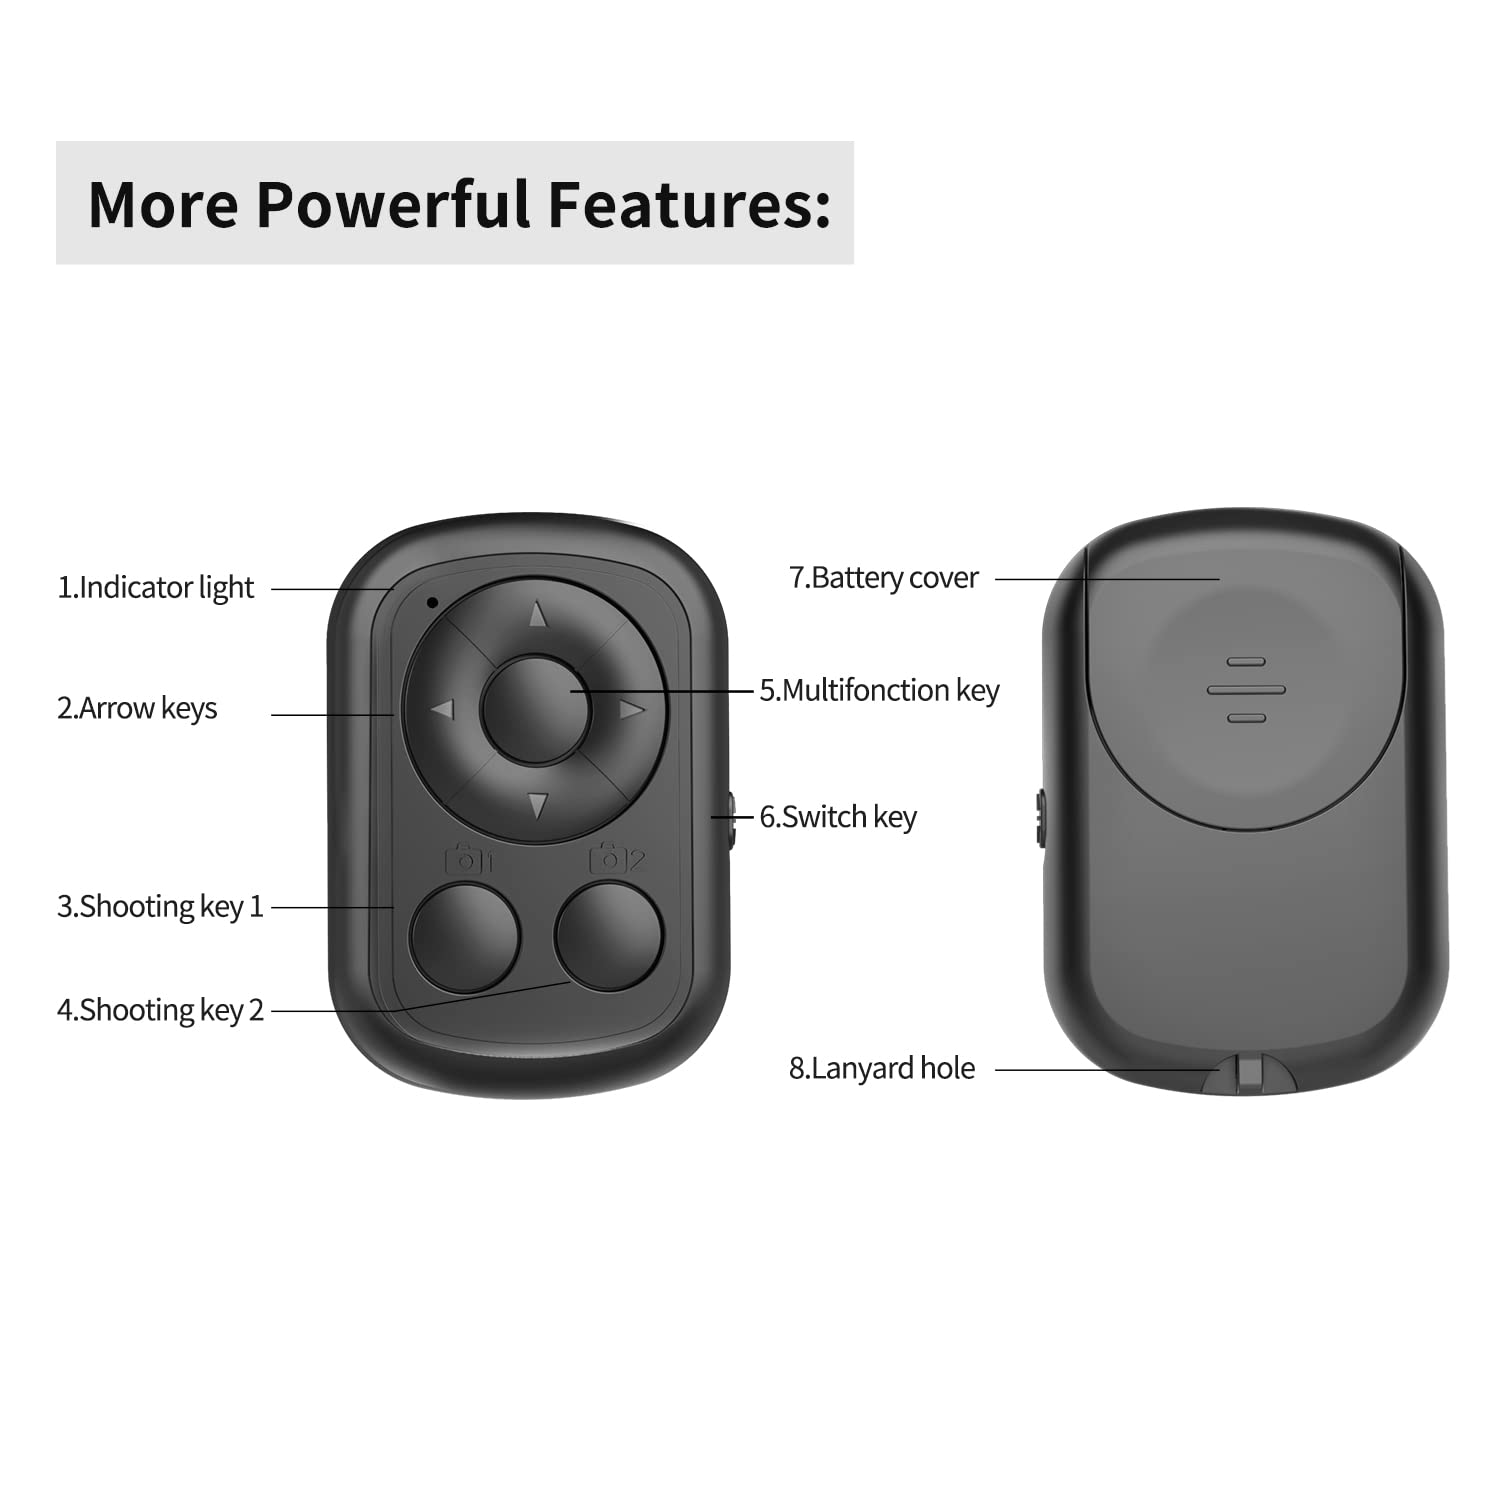 TIK TOK Bluetooth Remote Control,Kindle App Bluetooth Scrolling Page Turner for iPhone iPad Android, Camera Shutter Remote Control, 7 Buttons Support Tiktok Video Recording/Play/Pause/Give a Like